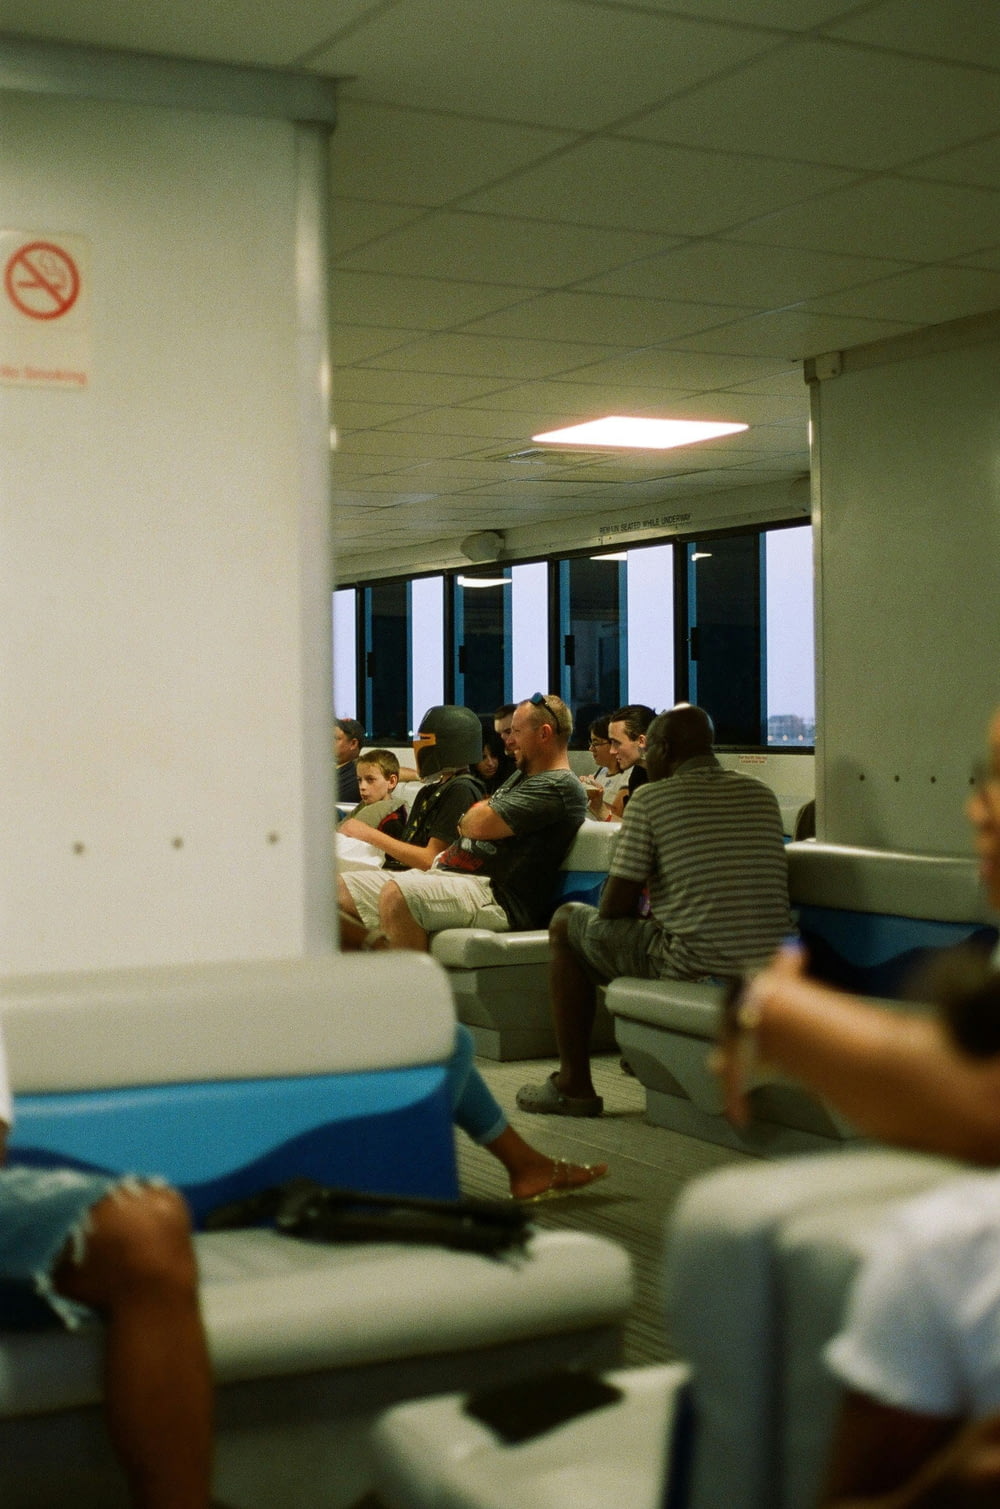 a group of people sitting in chairs in a room